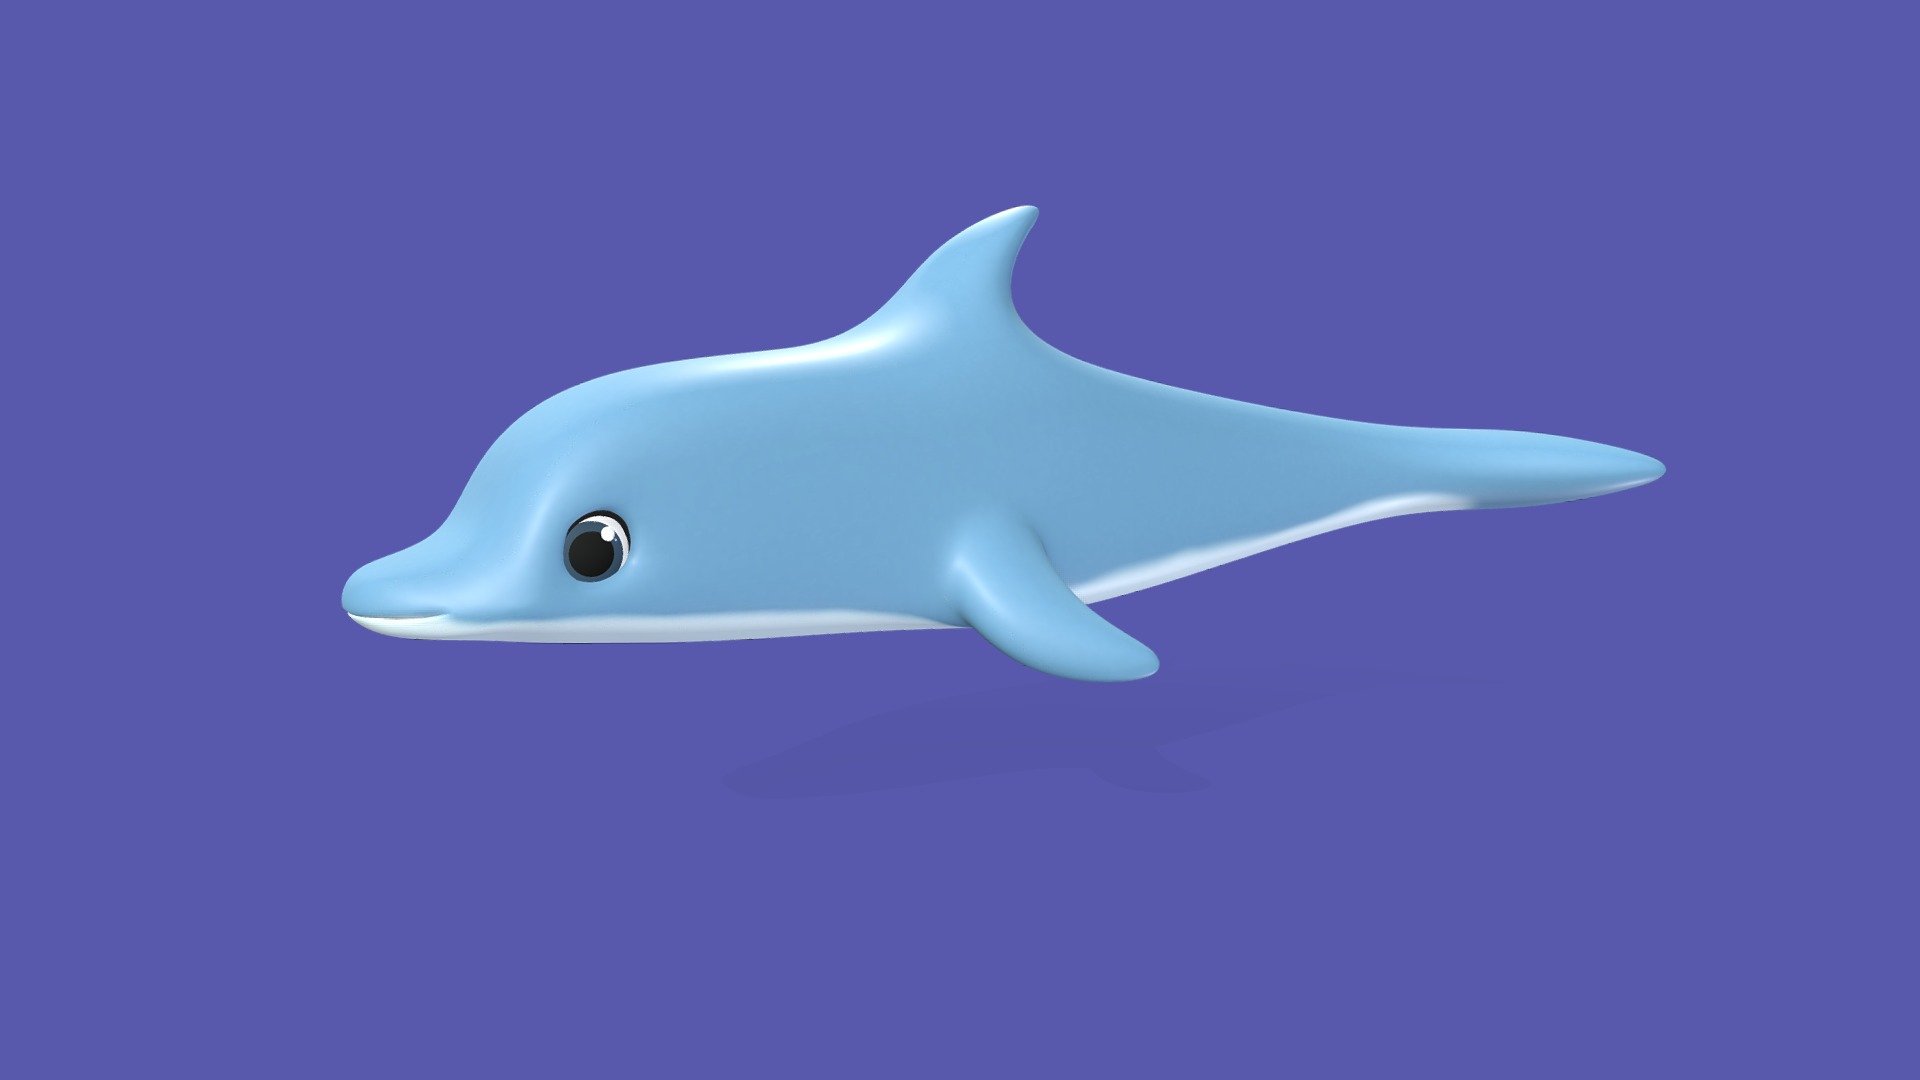 &ldquo;Meet your new aquatic companion - the adorable 3D Stylized Cute Toon Dolphin! Perfectly optimized with a low poly count, this lovable dolphin is all set to make a splash in your games and projects. With its charming design and smooth animations, it's a delightful addition to any undersea adventure. Subdivision ready for added detail, this endearing dolphin model is sure to bring joy and playfulness to your virtual world. Dive into a world of fun and creativity with this lovable and lively character today!